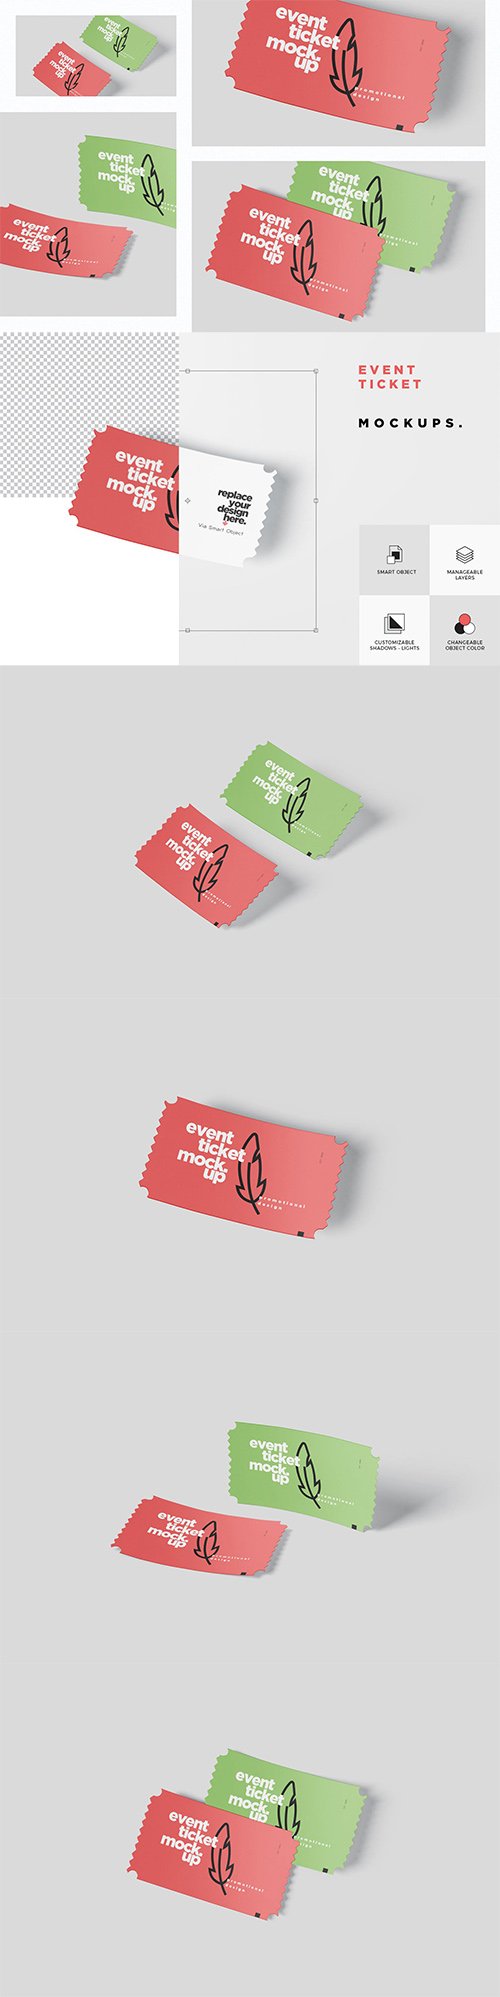 Event Ticket Mockup Set - Small Size PSD